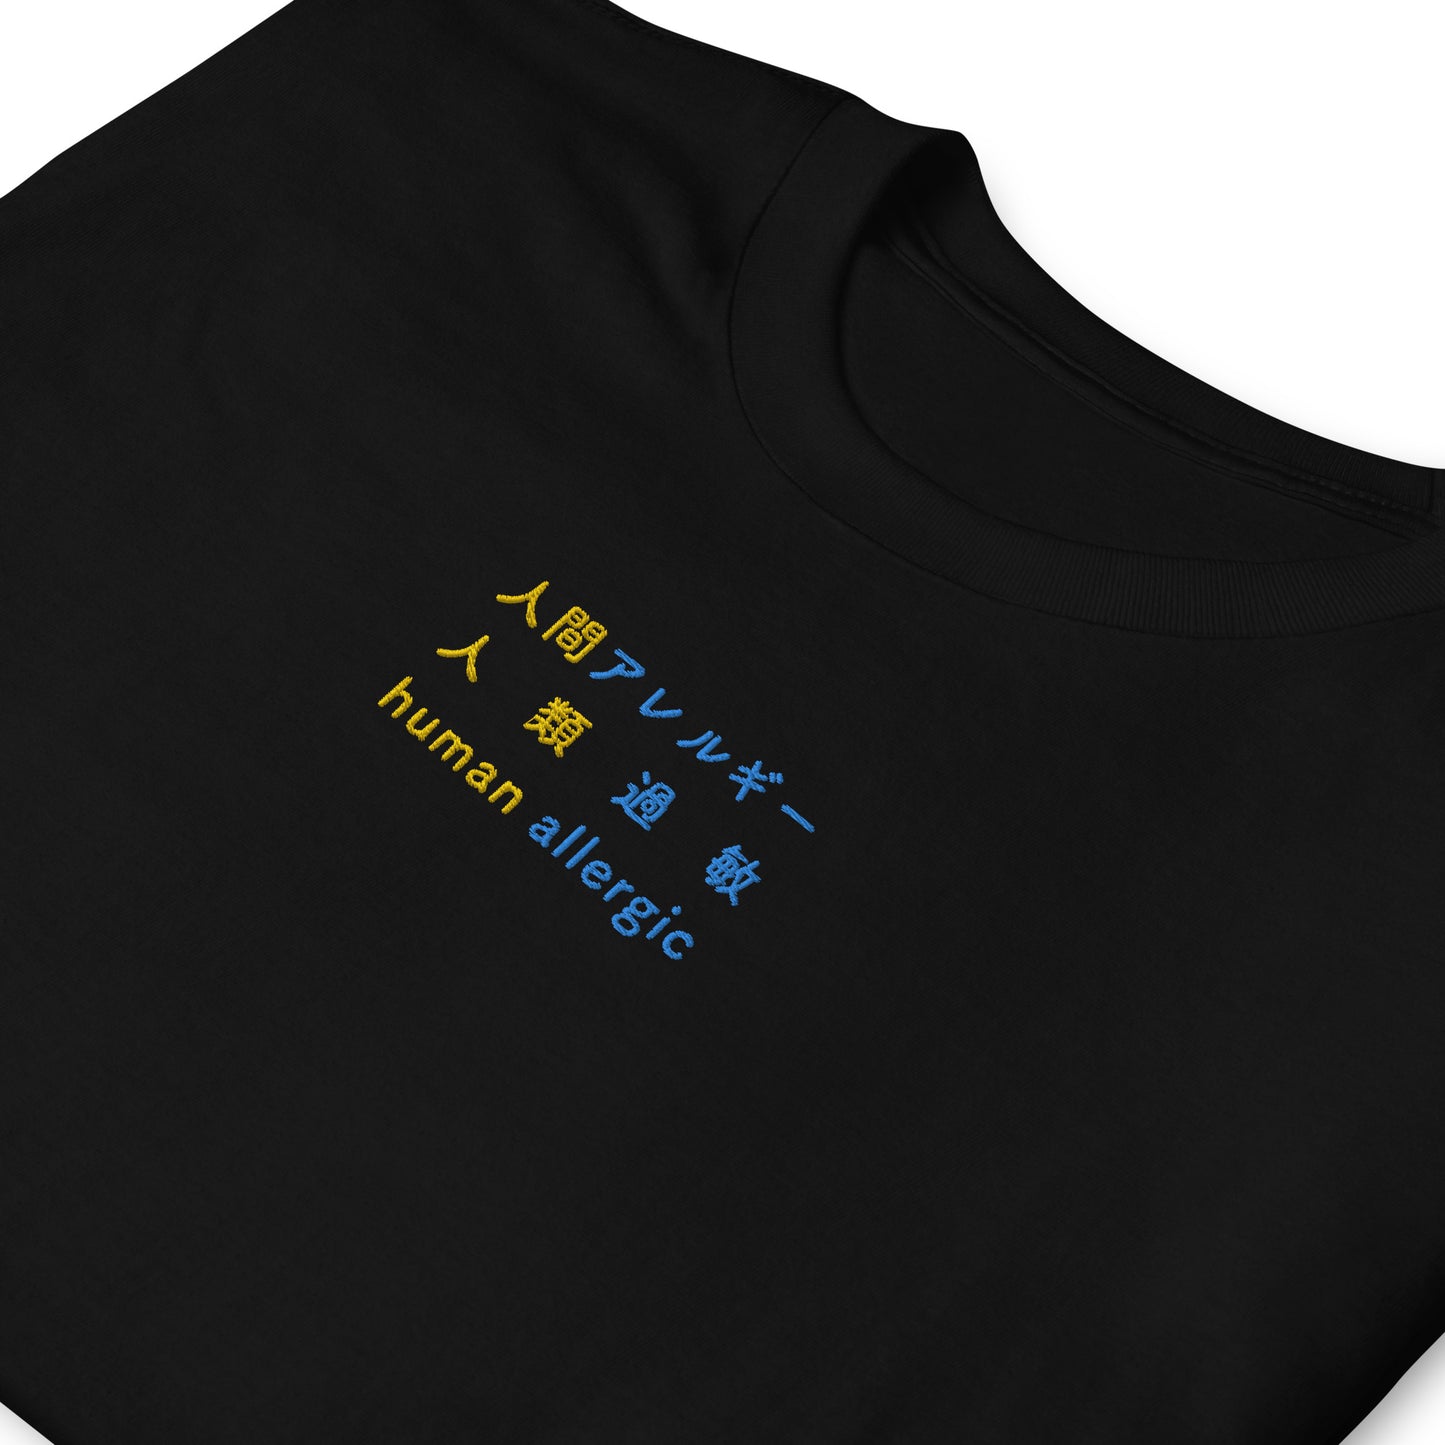 Black High Quality Tee - Front Design with an Yellow, Blue Embroidery "Human Allergic" in Japanese,Chinese and English